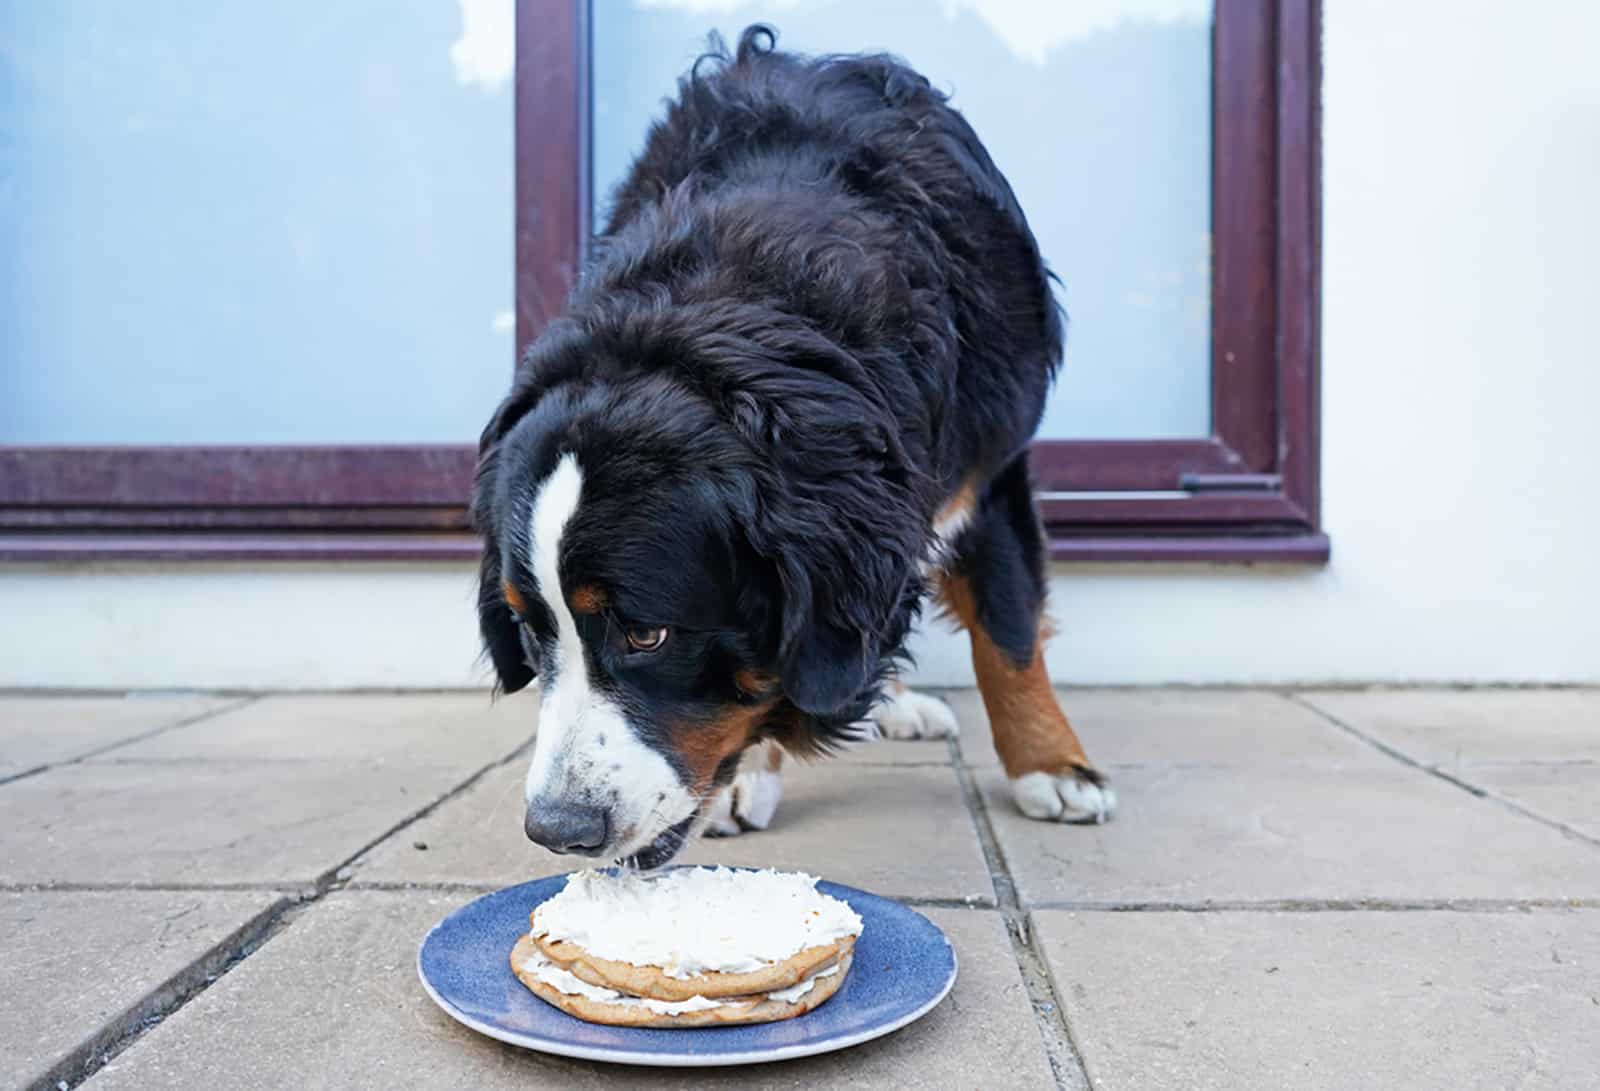 bernese mountain dog eating from the plate outdoors